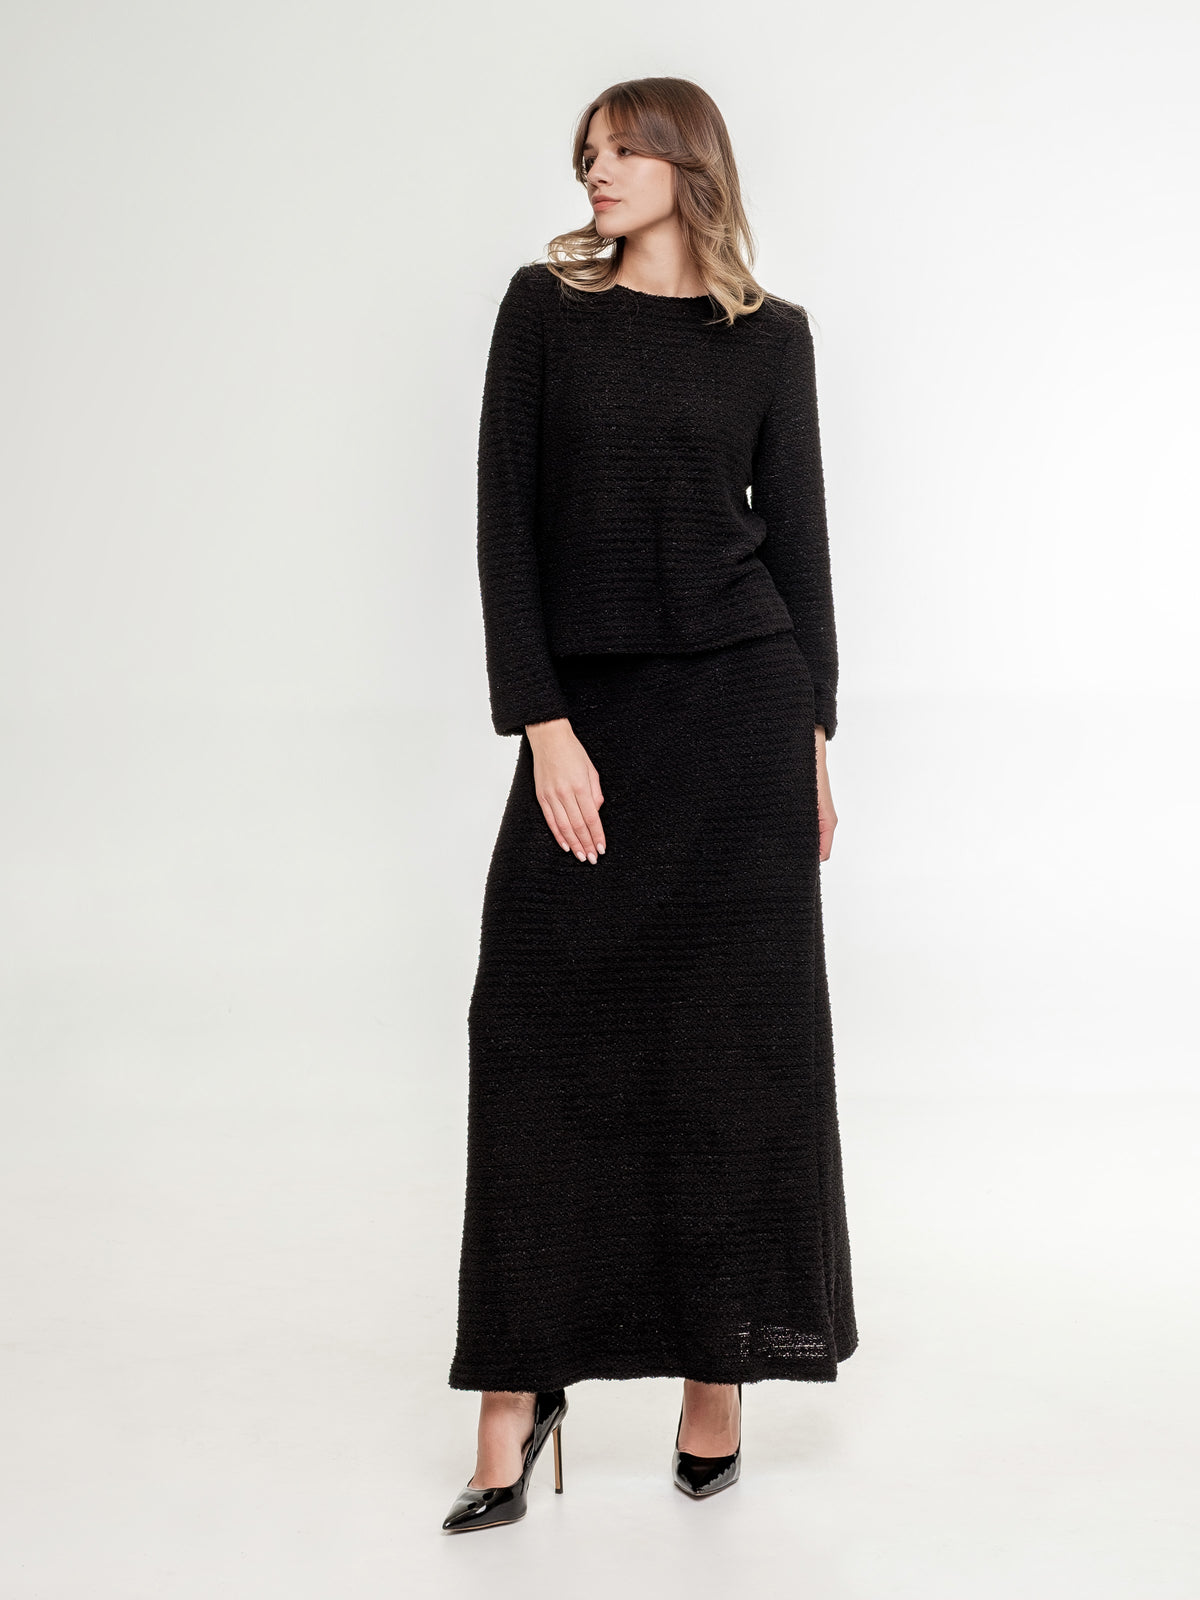 black_textured_top_with_long_sleeves and long skirt